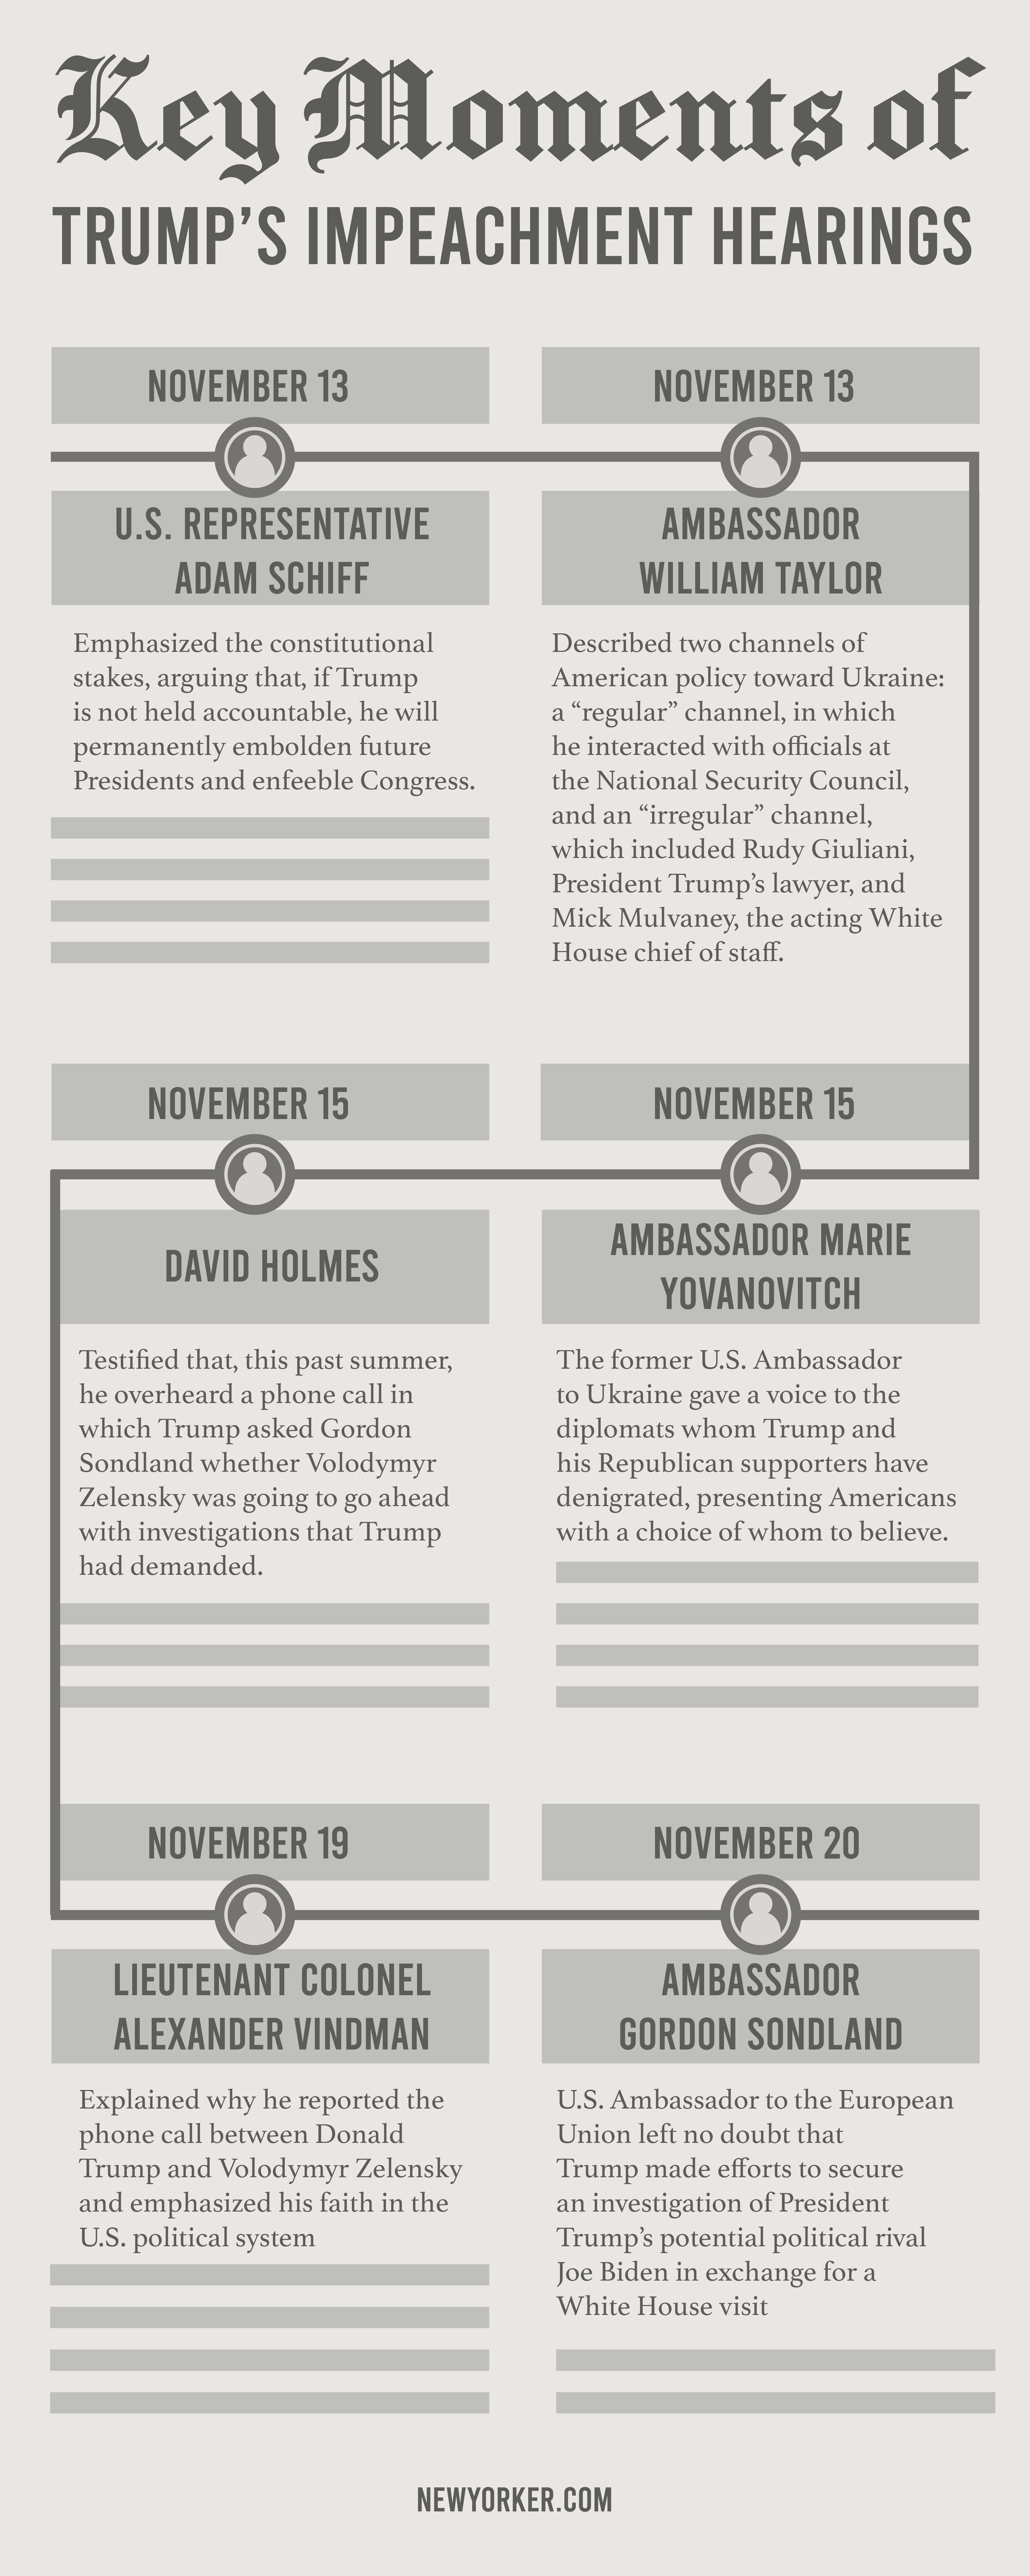 Its hard to keep up with all the events happening with Trumps impeachment, so here are a few key events.